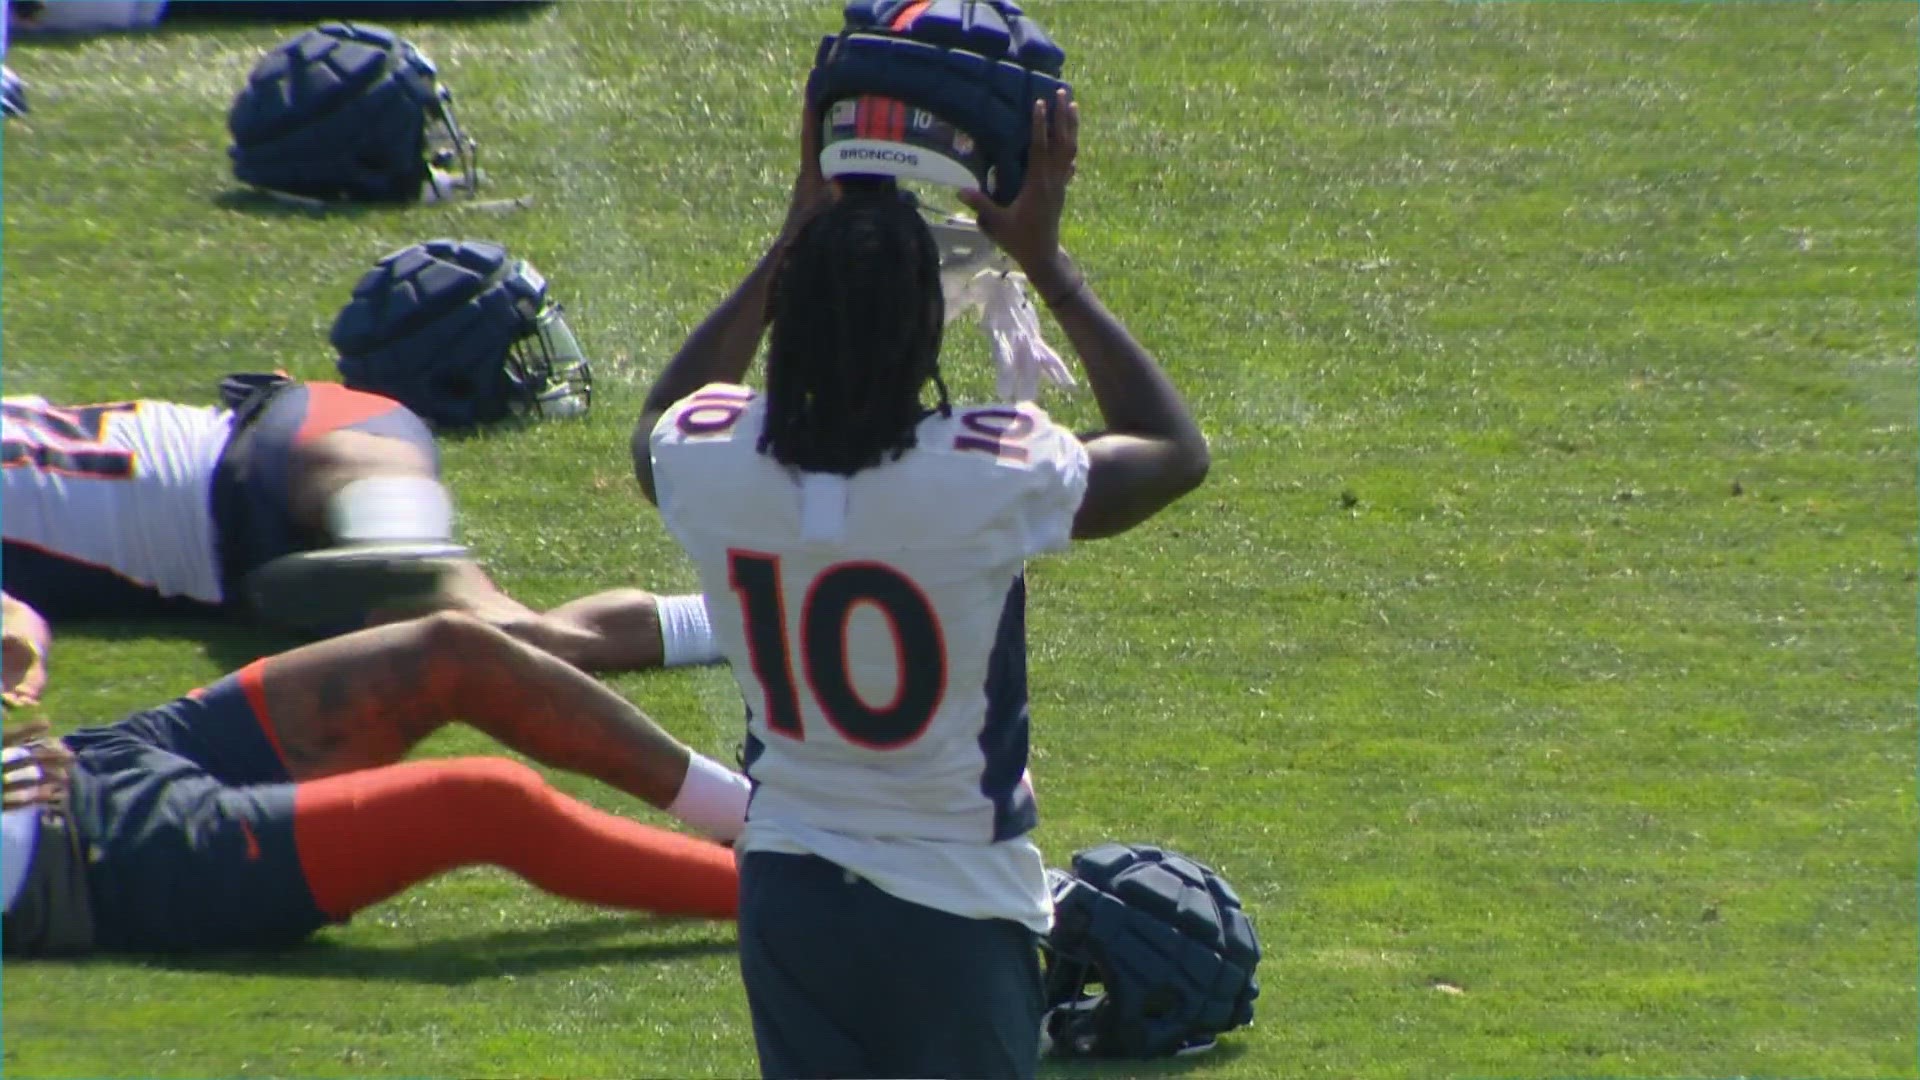 Broncos receiver pulled up after a running play in practice against the Rams. Results revealed a moderate strain that may mean missing the opener vs. Raiders.